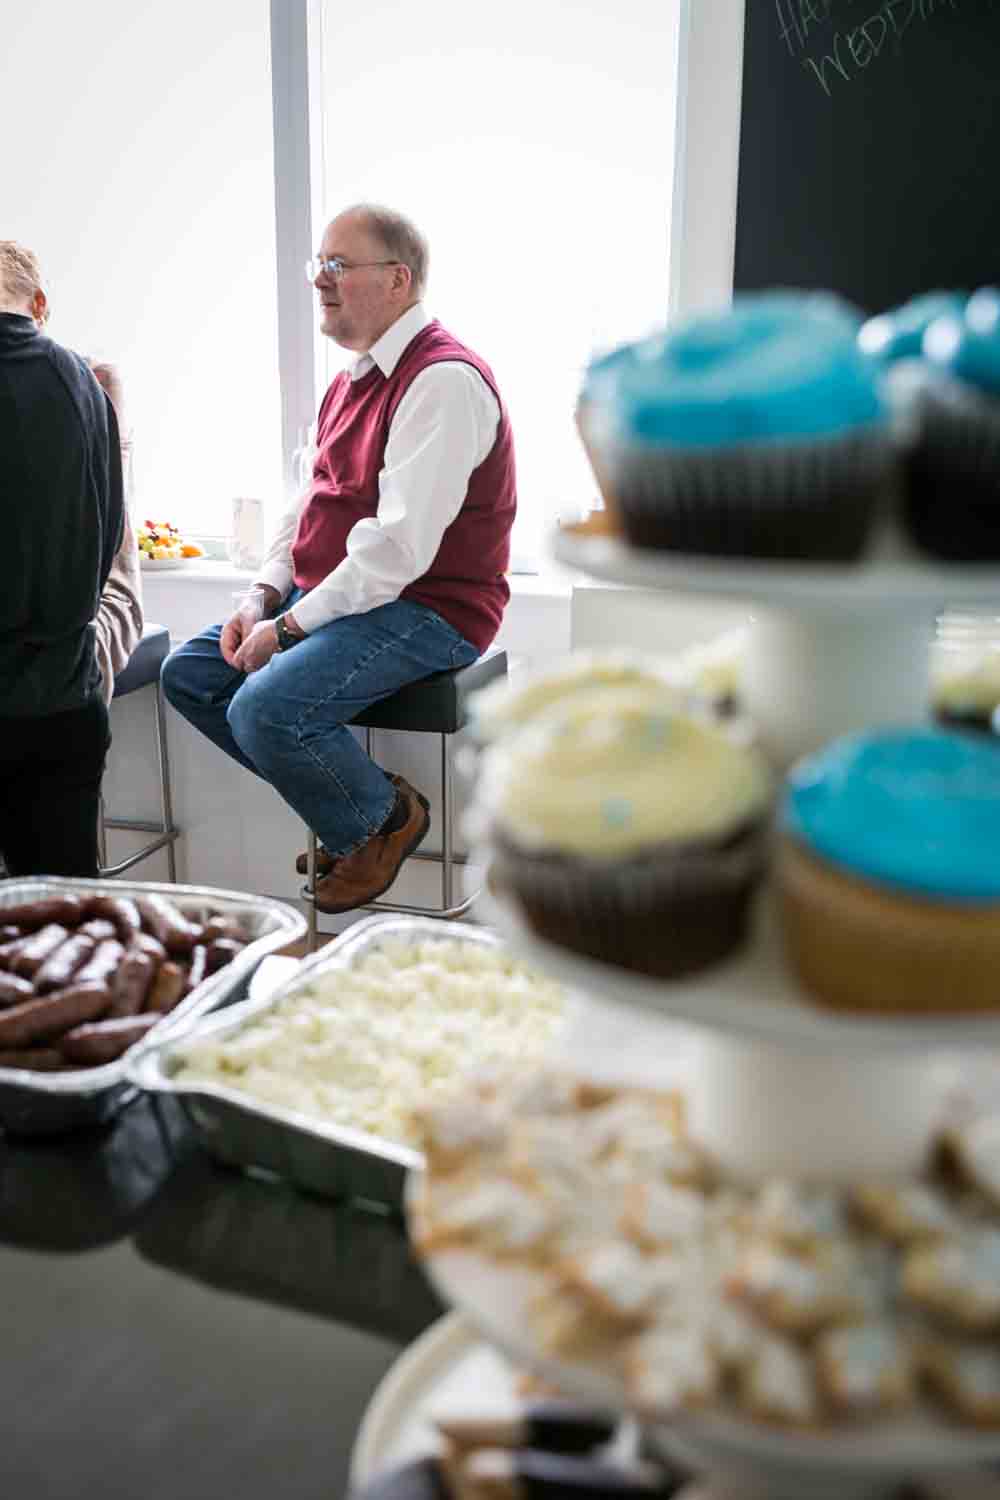 View through cupcakes of man sitting by window